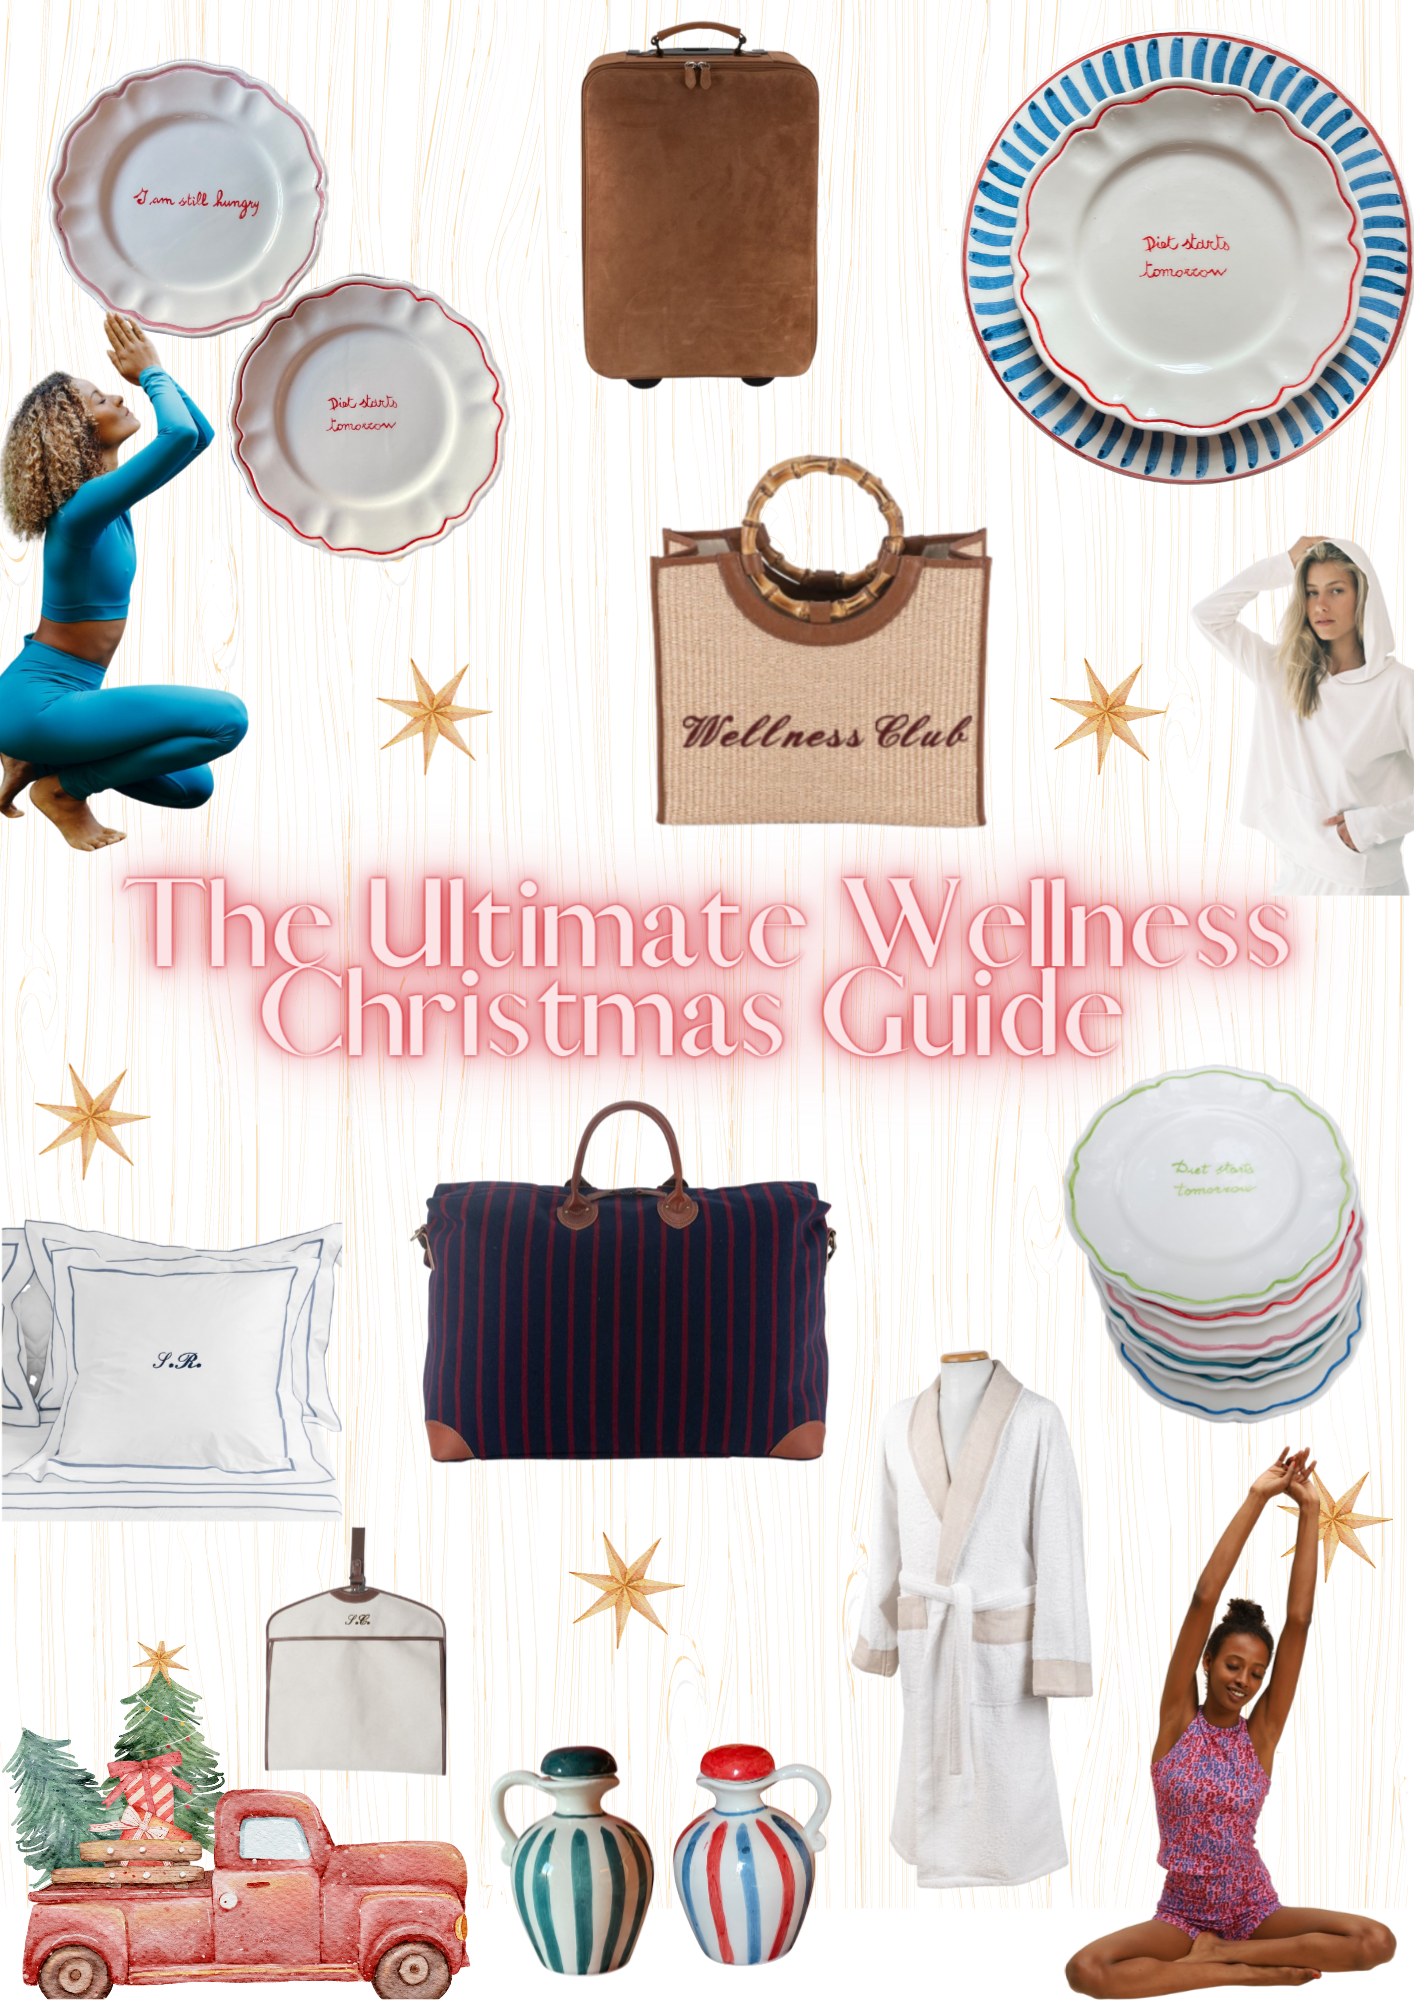 15 Christmas gifts to promote health and wellness this season